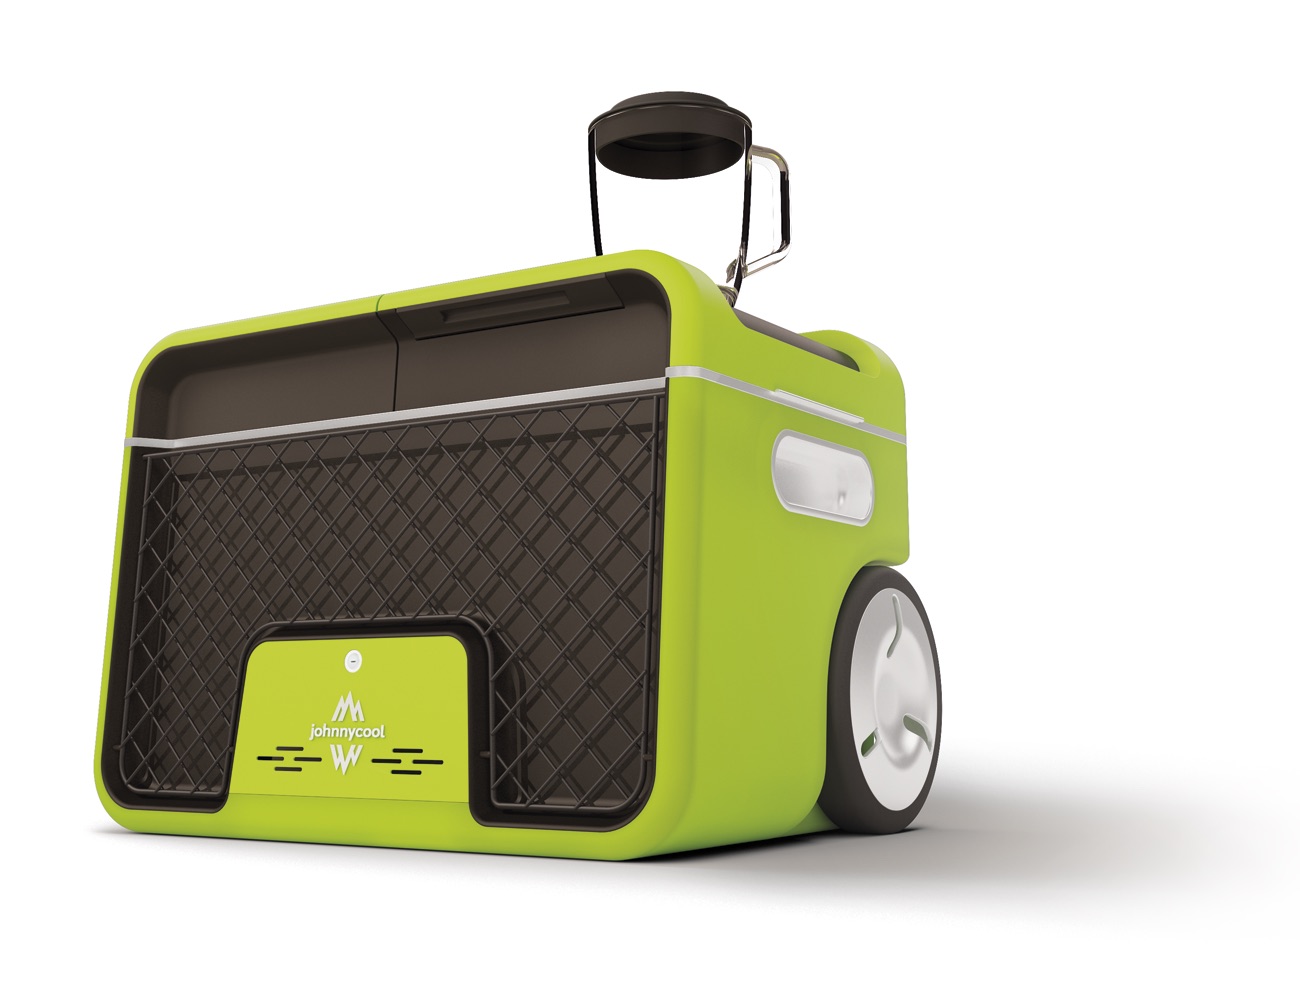 Johnny Cool is the world’s First sustainable cooler